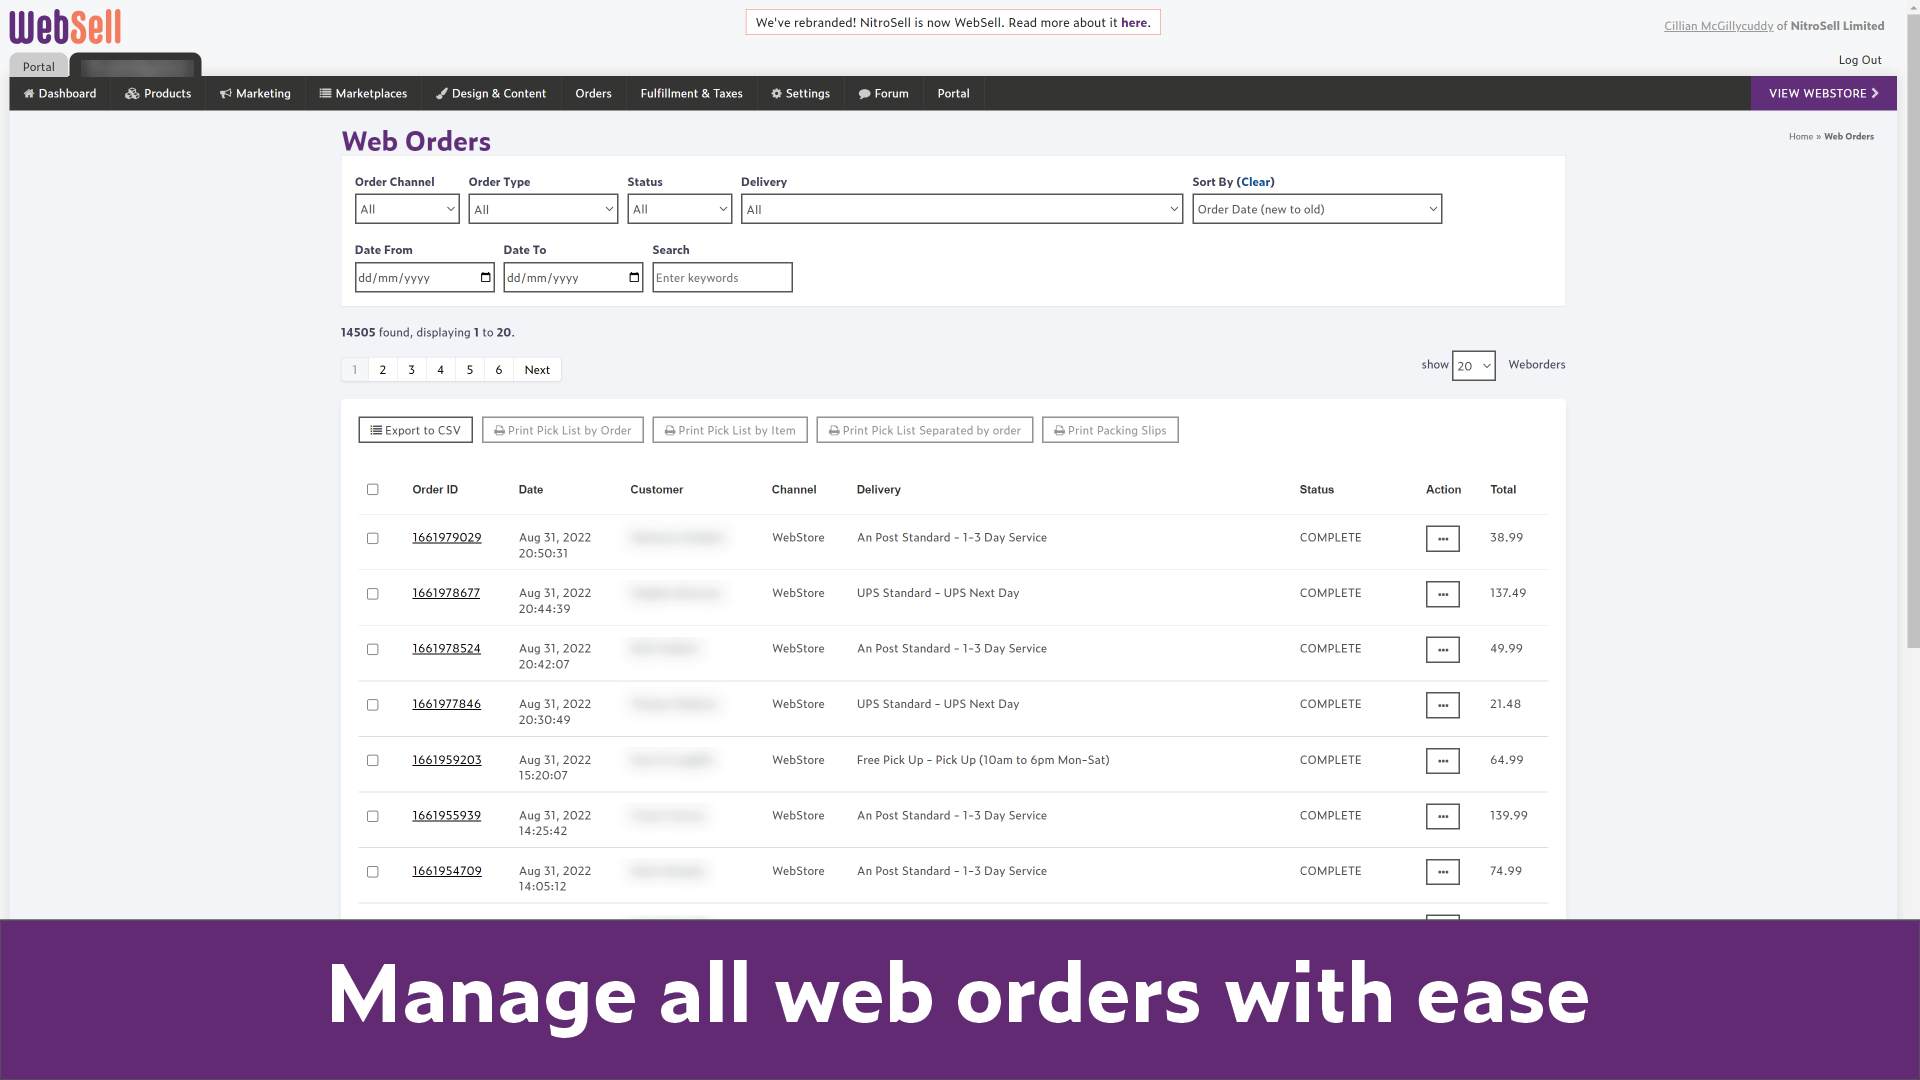 Manage online orders with ease through the WebSell e-commerce platform. Print pick lists and packing slips to make your team's life easier.